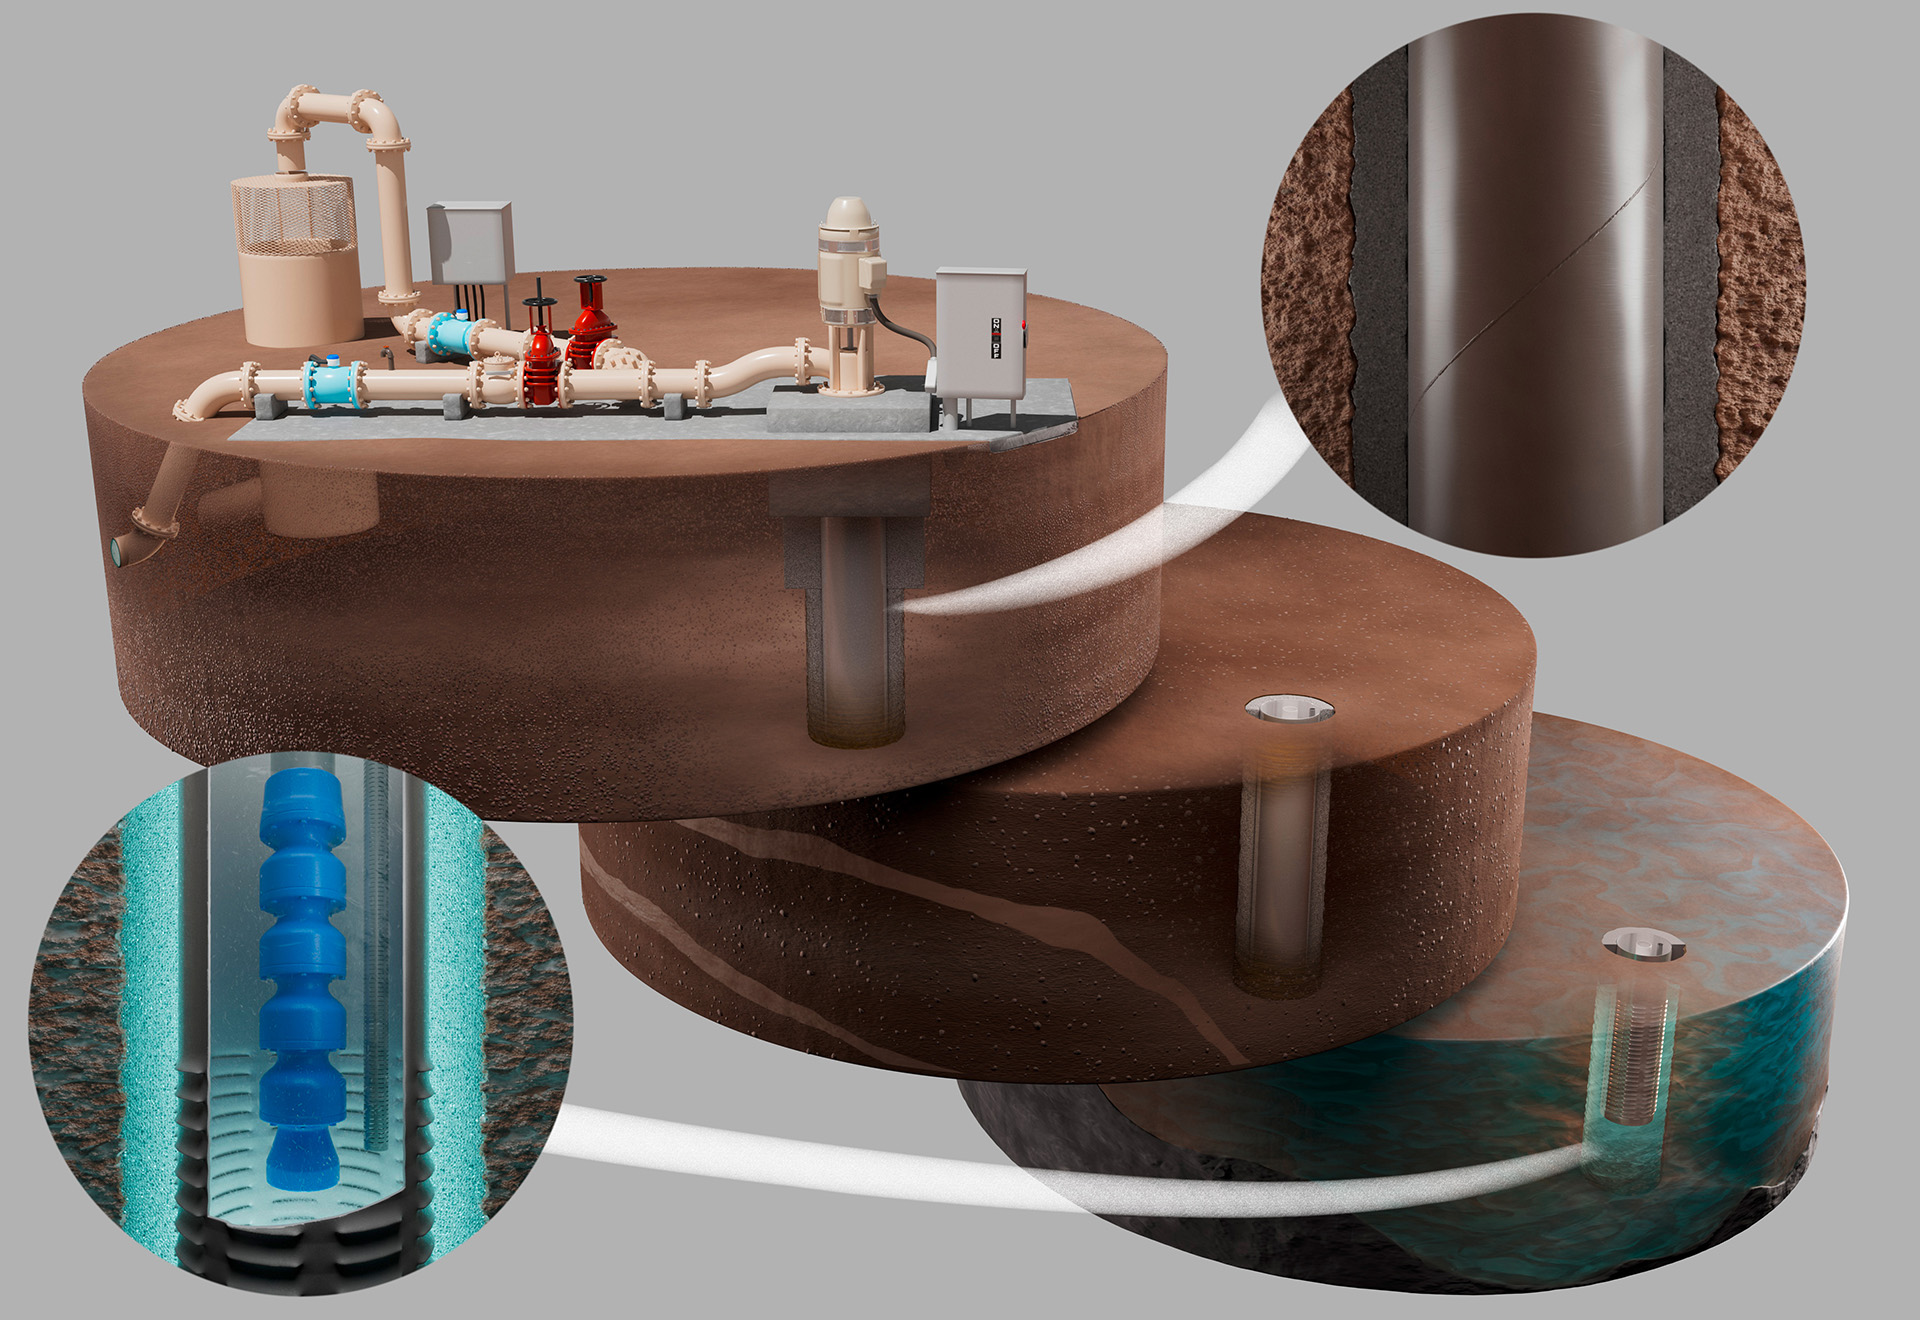 Components of a water well. The image shows three segements, the first one being the surface. The pump, valves, flow meters and pipes are shown. The second level shows the well below ground level, going through different layers of earth. The third layer depicts the well within the water reservoir, deep underground. Here, the well casing has openings to allow water to be pumped above ground.